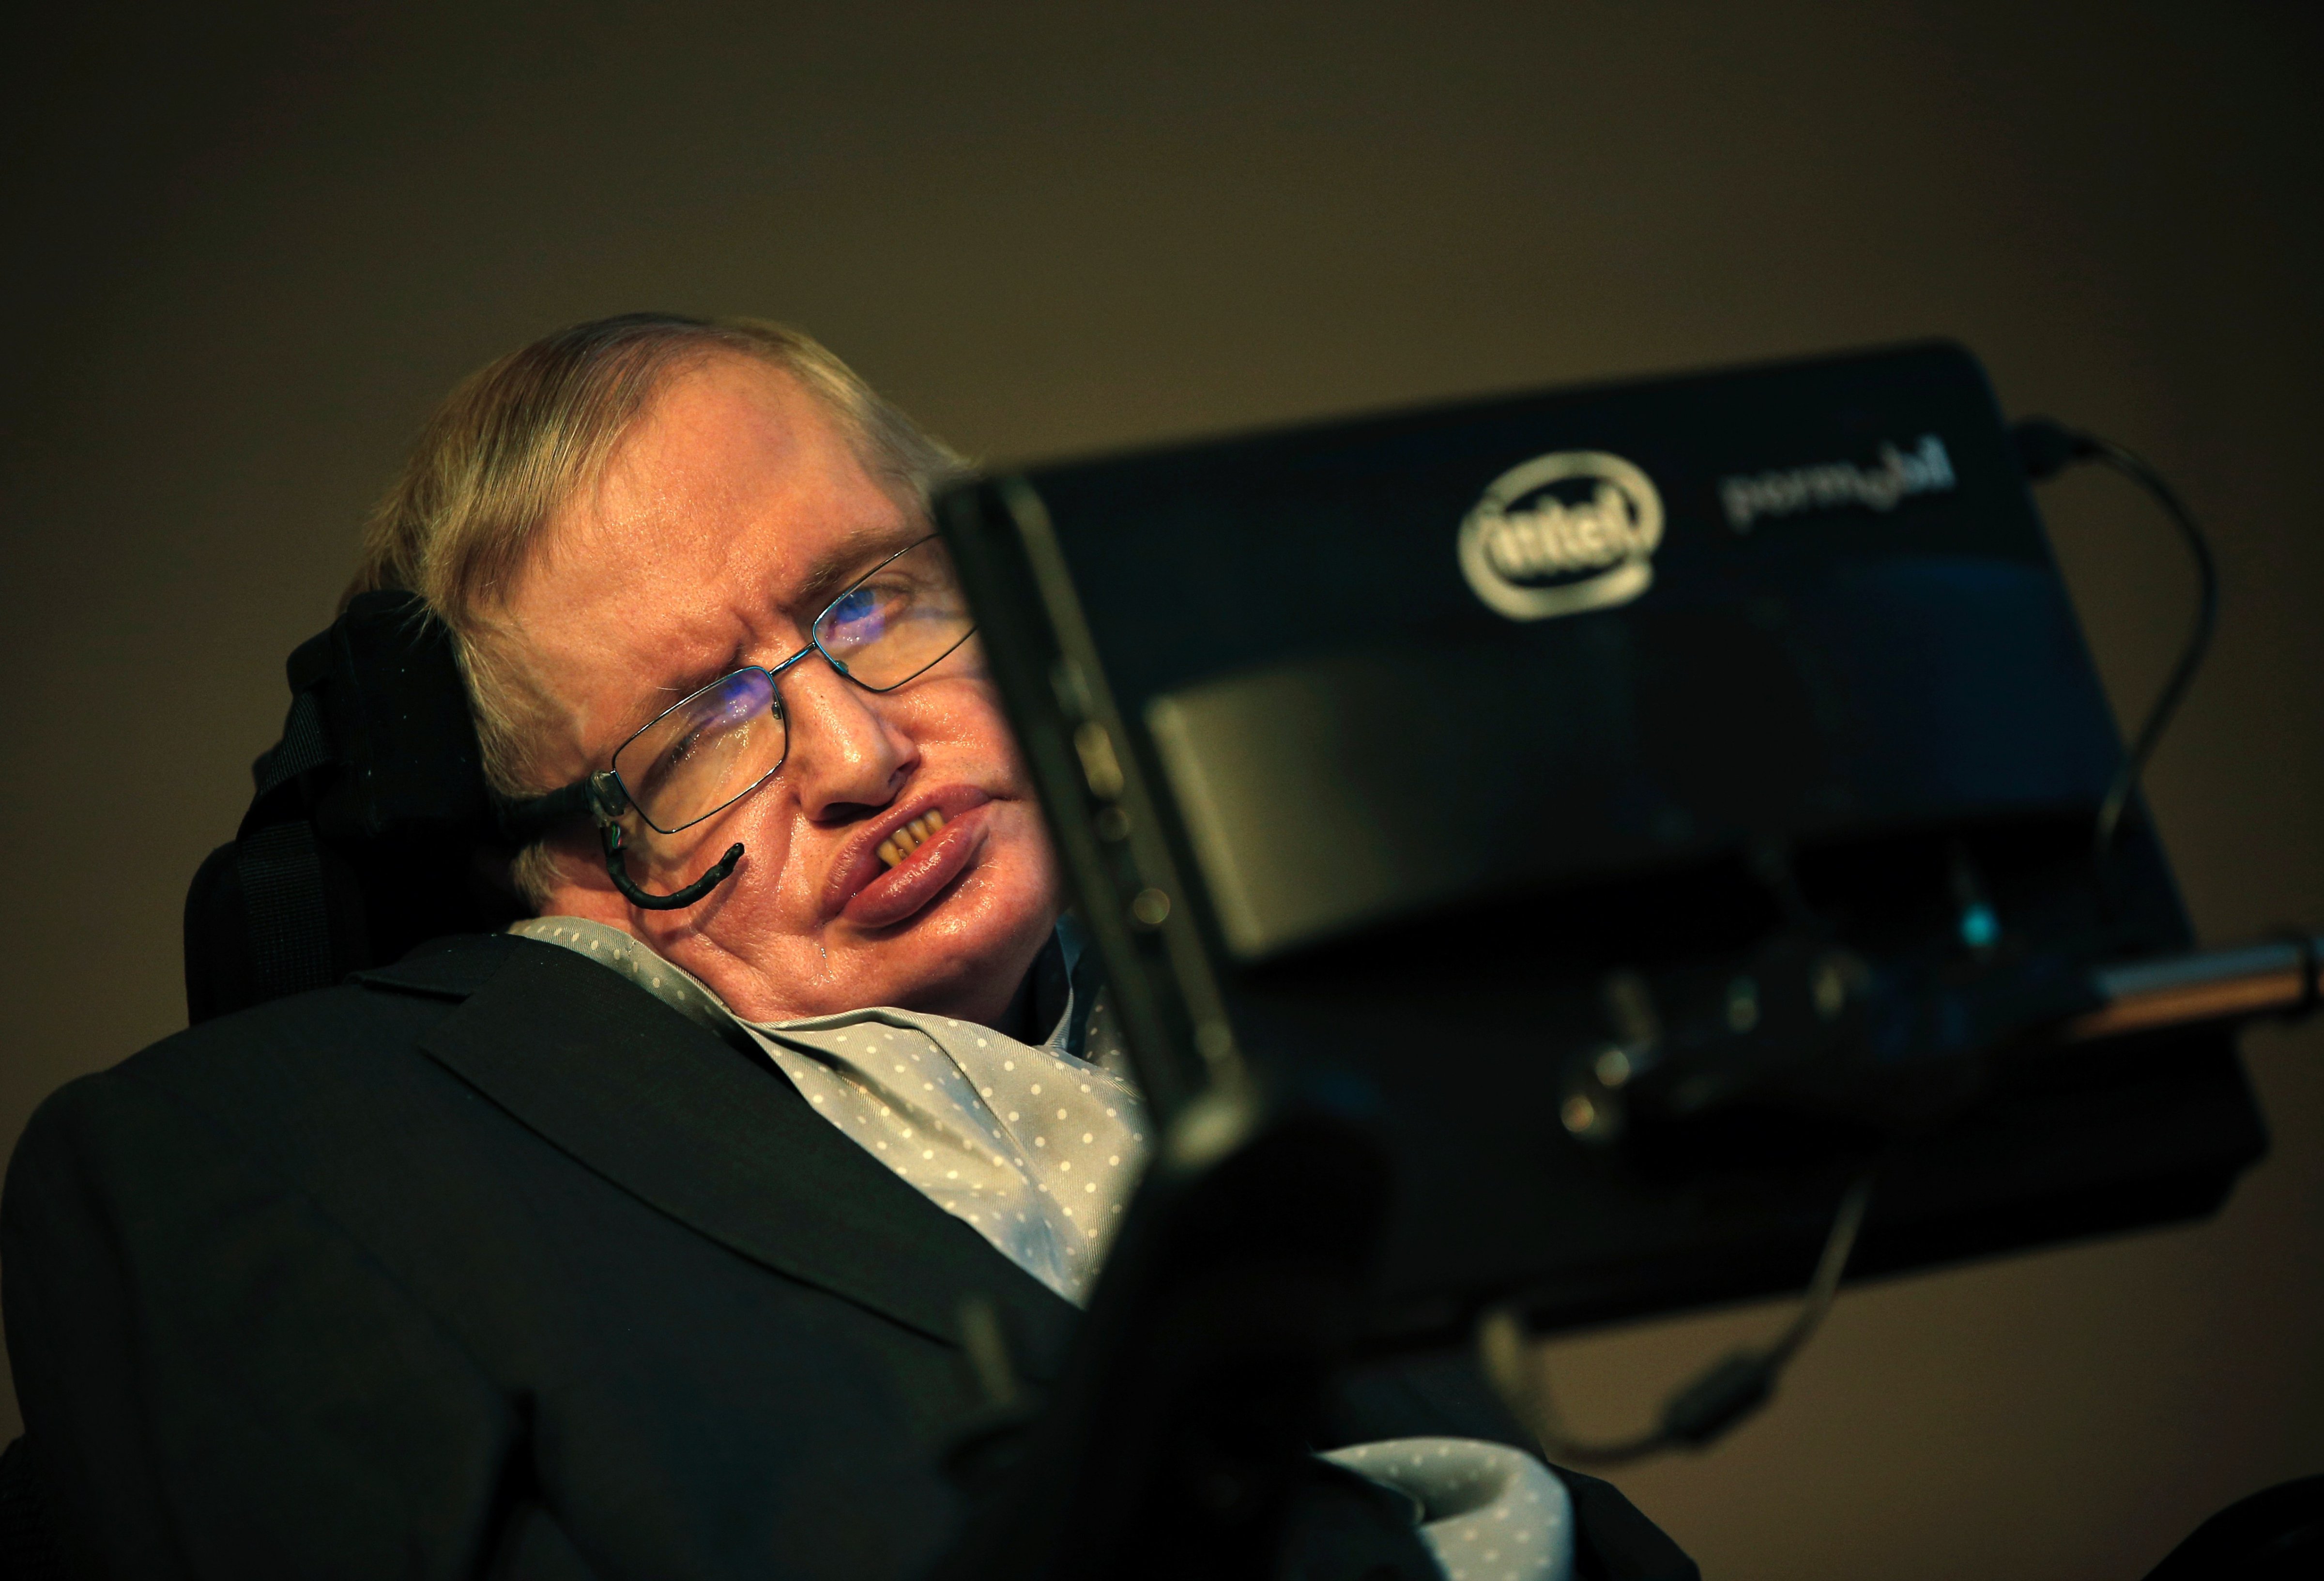 Professor Stephen Hawking attends a press conference to announce a new award for science communication in London on December 16, 2015. (Adrian Dennis—AFP/Getty Images)